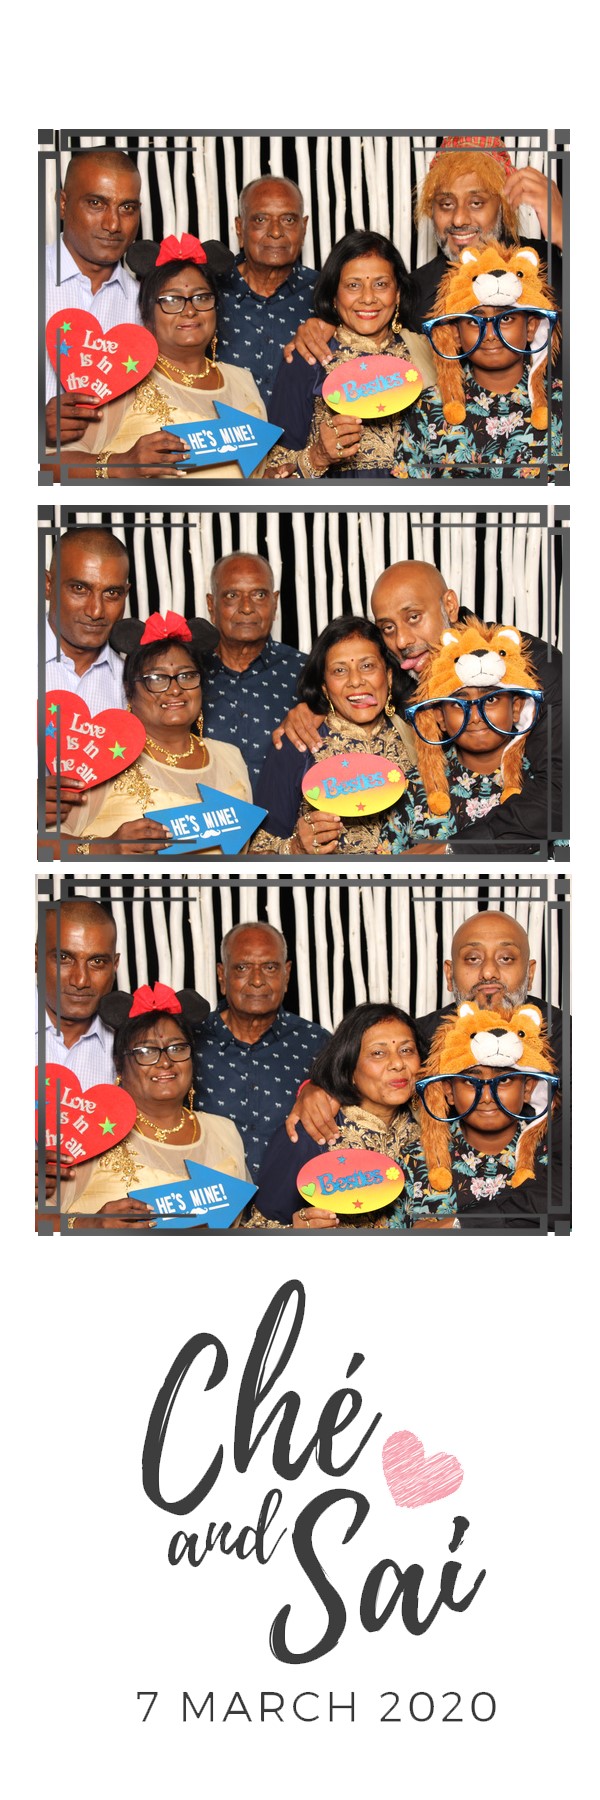 Wedding Photobooths in Durban, Umhlanga and Ballito - Professional Printing Booths for Hire